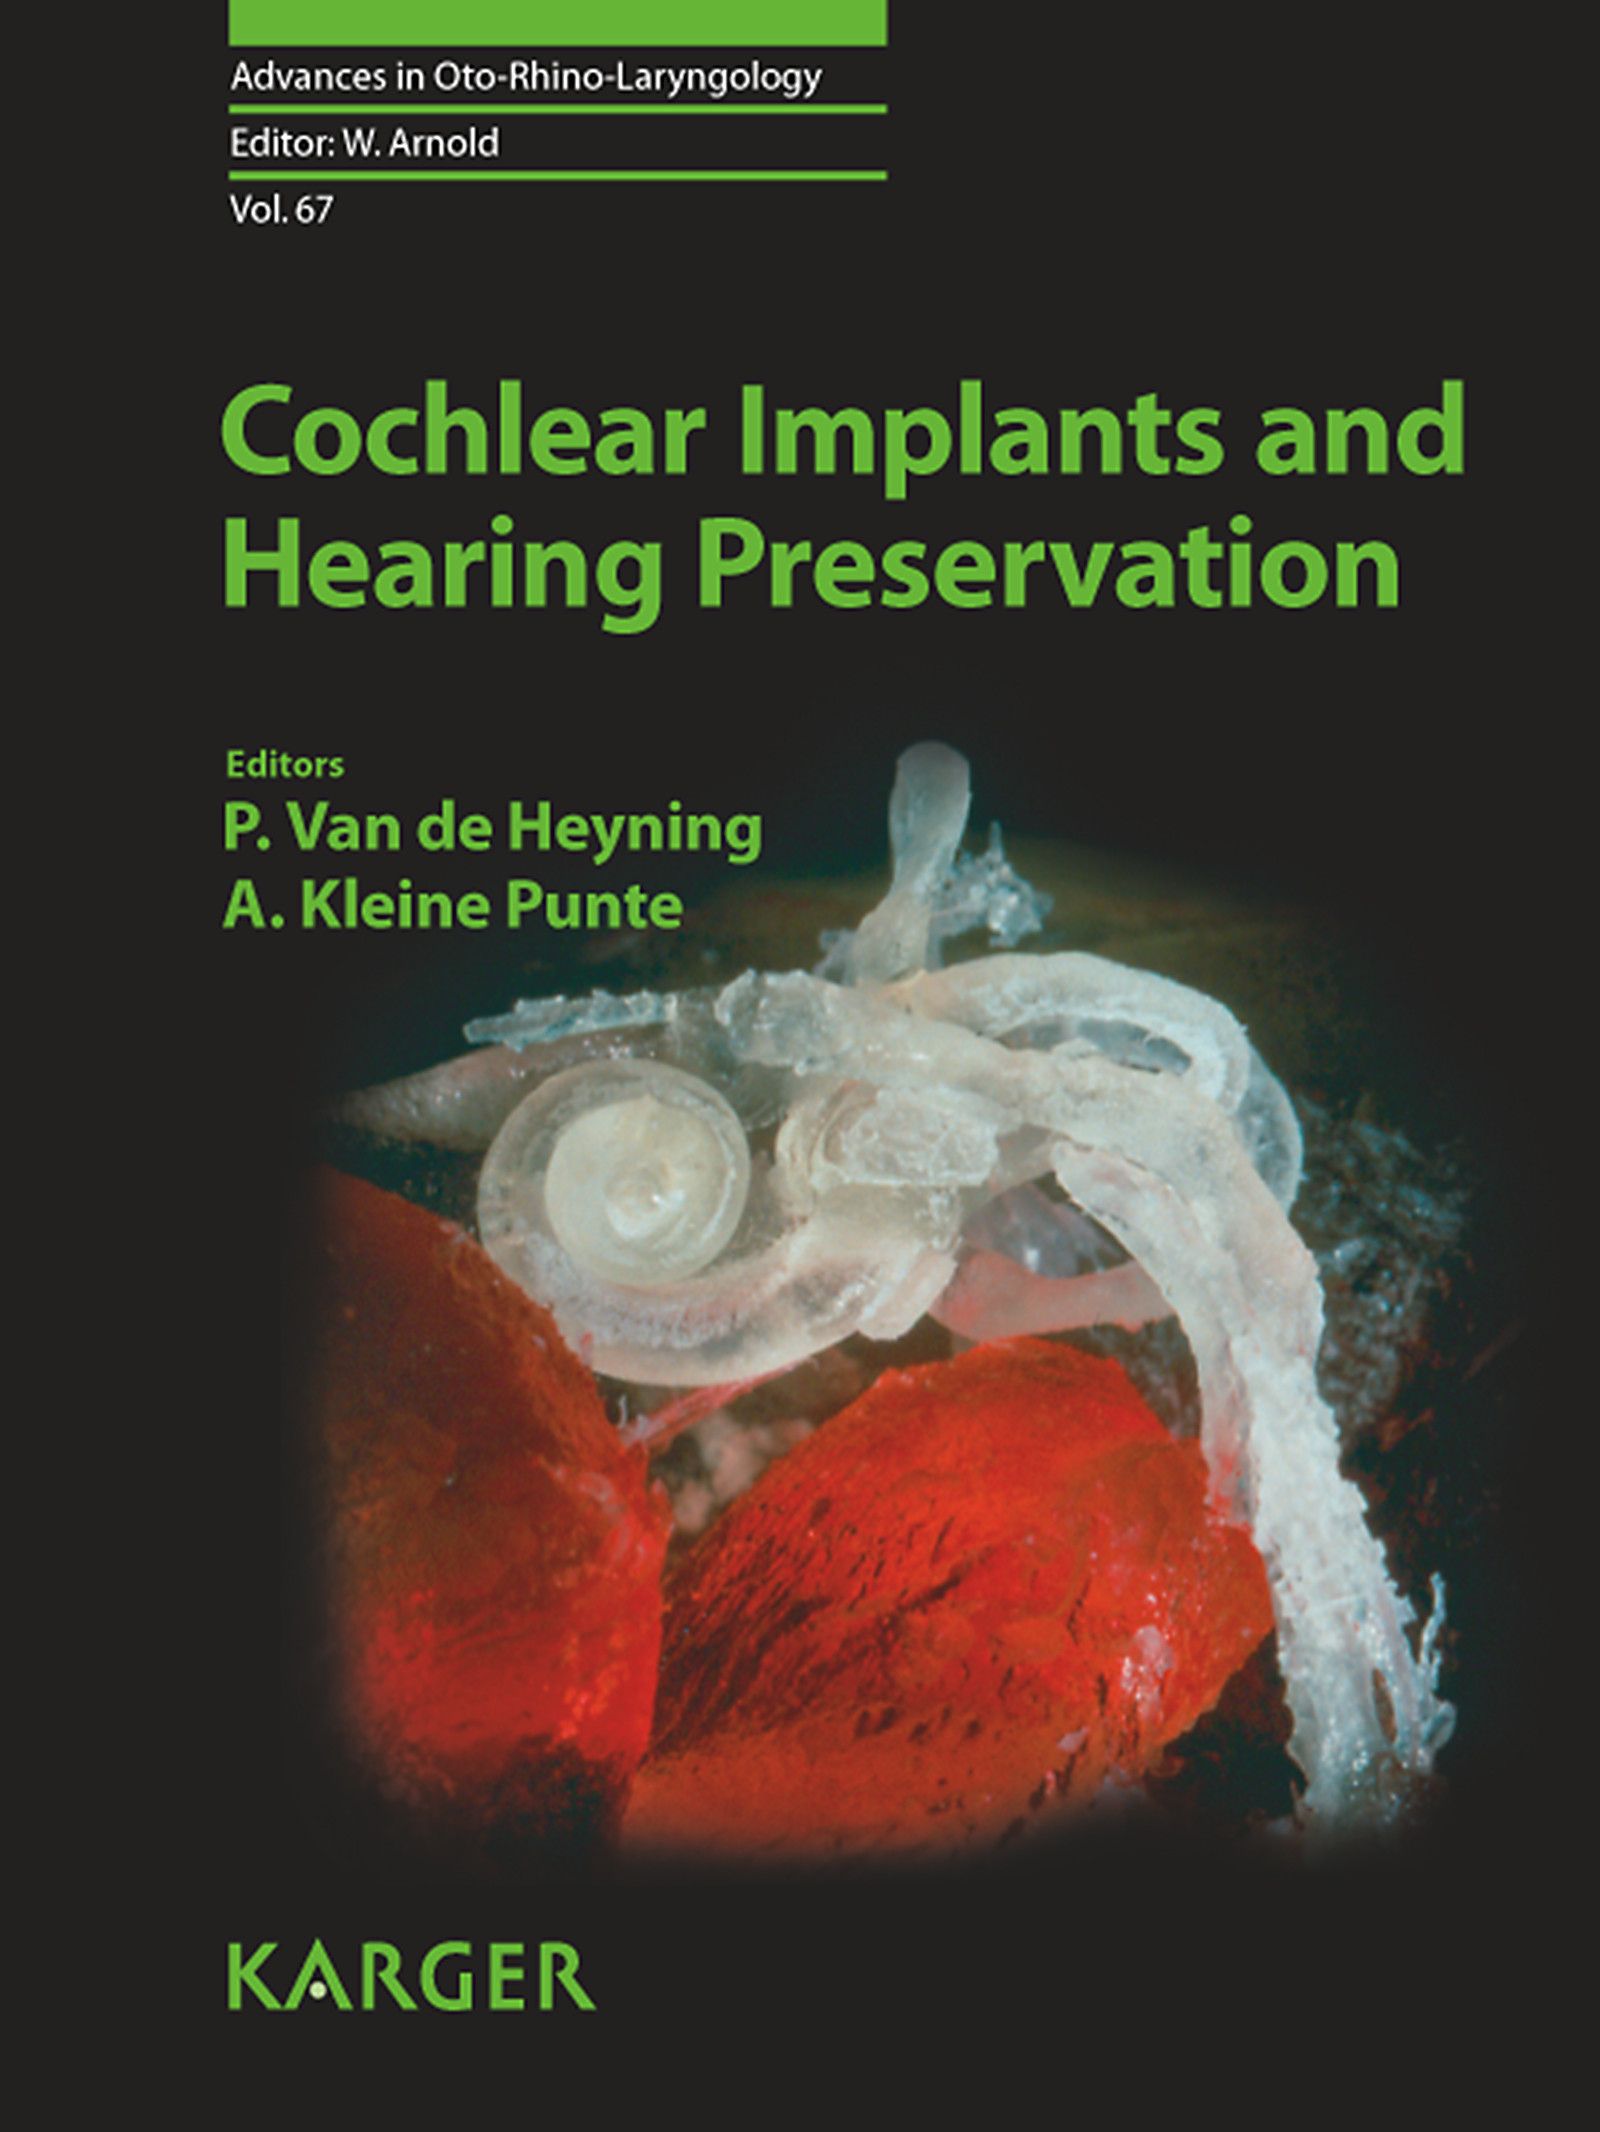 Cochlear Implants and Hearing Preservation